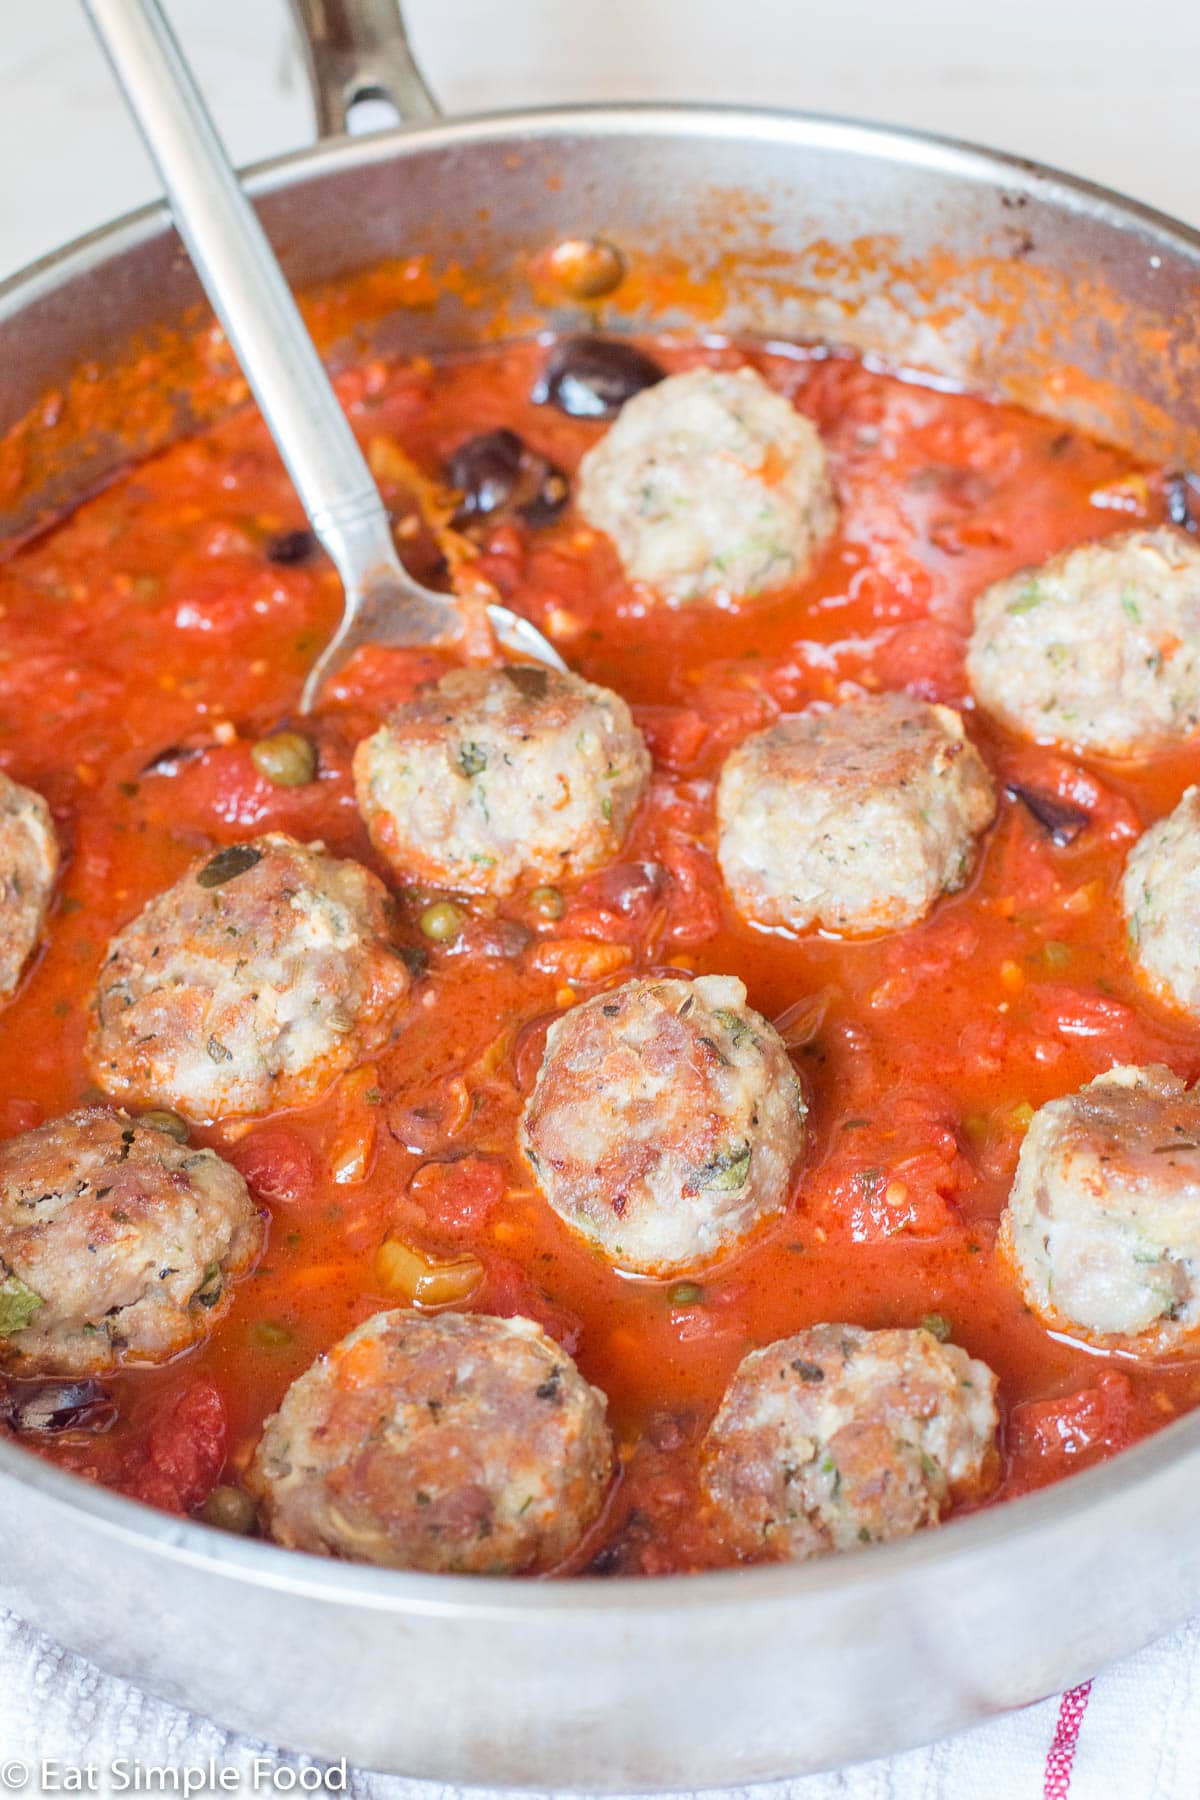 Large stainless steel pan with a silver spoon. Pan is full of browned sausage meatballs in a tomato sauce with olives and capers. Close up.